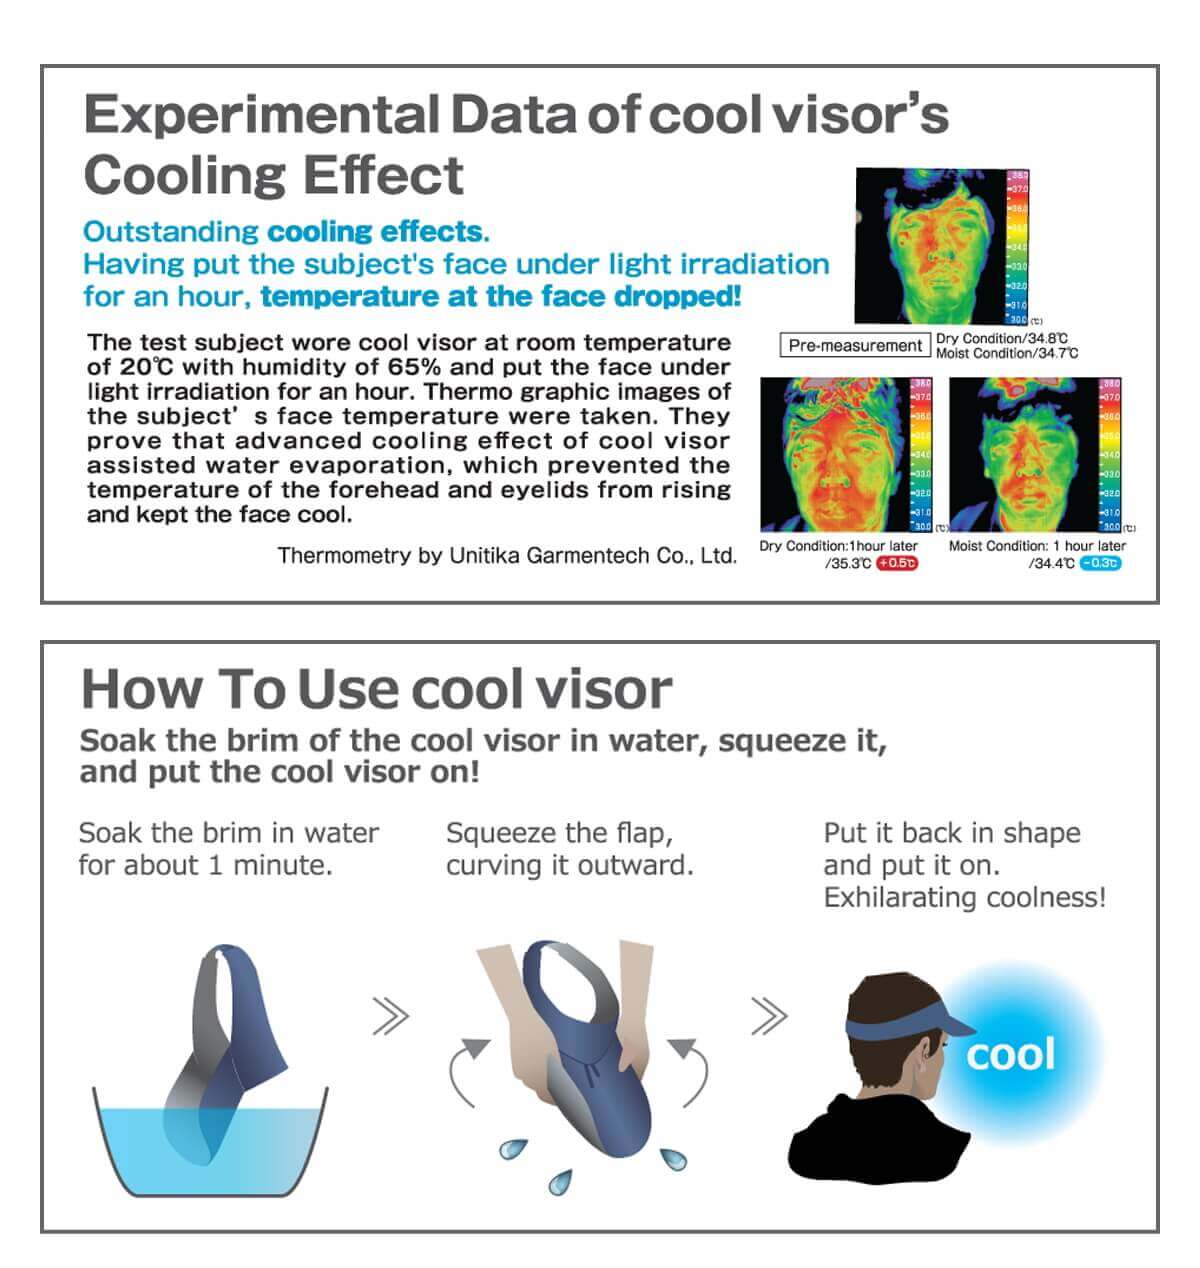 How to use cool visor